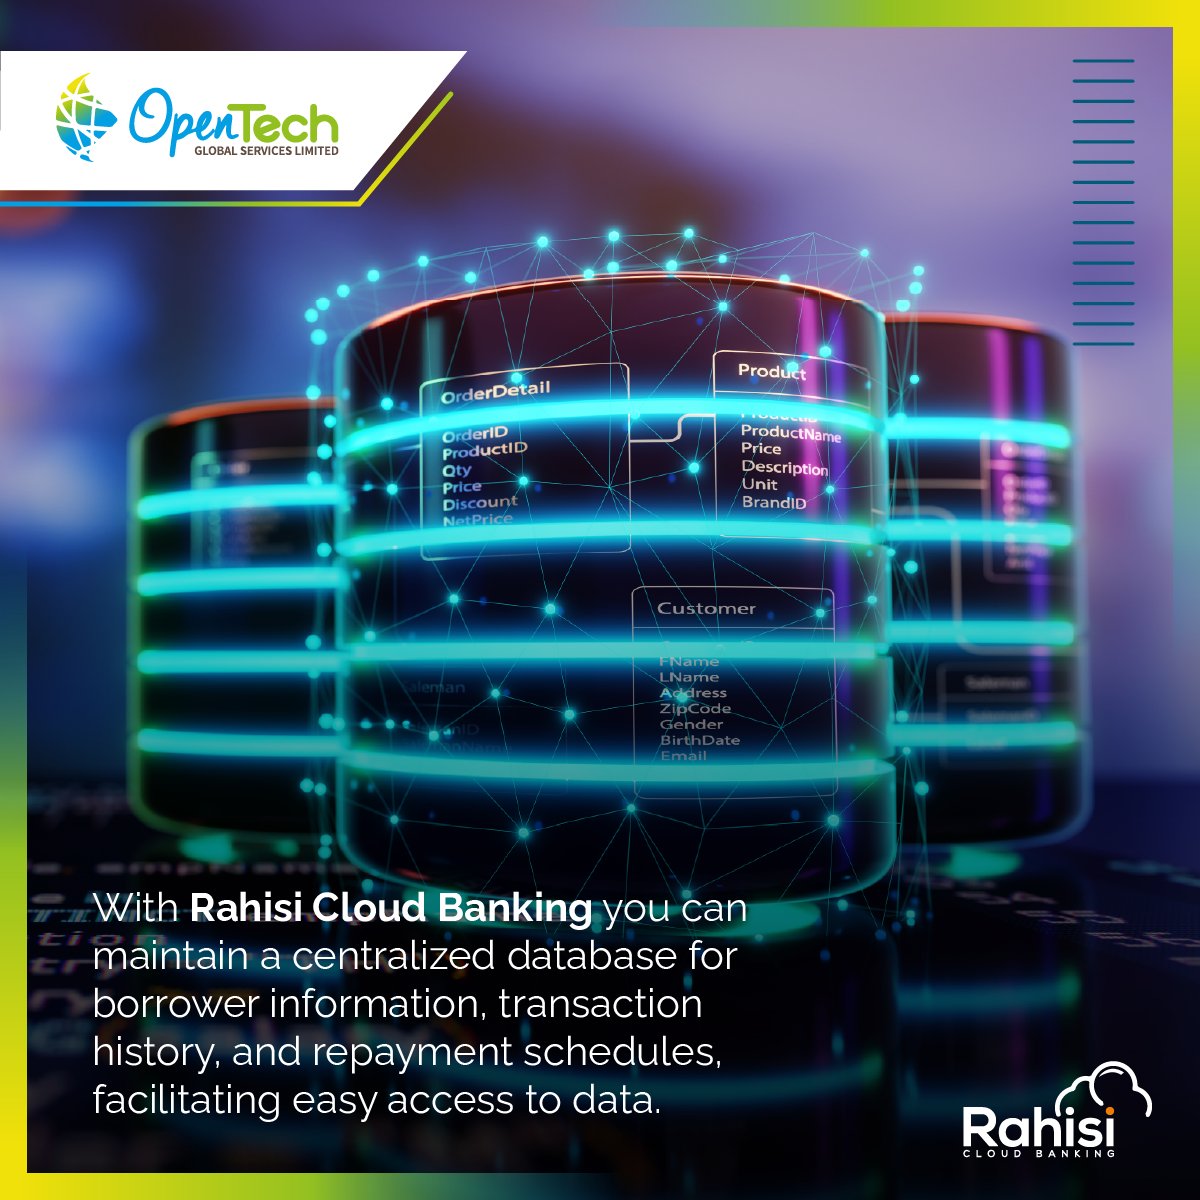 Rahisi Cloud Banking offers easy access to borrower information, transaction history, and repayment schedules - all in a secure environment.
#MoneyManagement #Money #Loan #Microfinance #RepaymentSchedules #TransactionHistory  #MobileMoney #Banking #LogBookLoan #AssetFinance #MFI